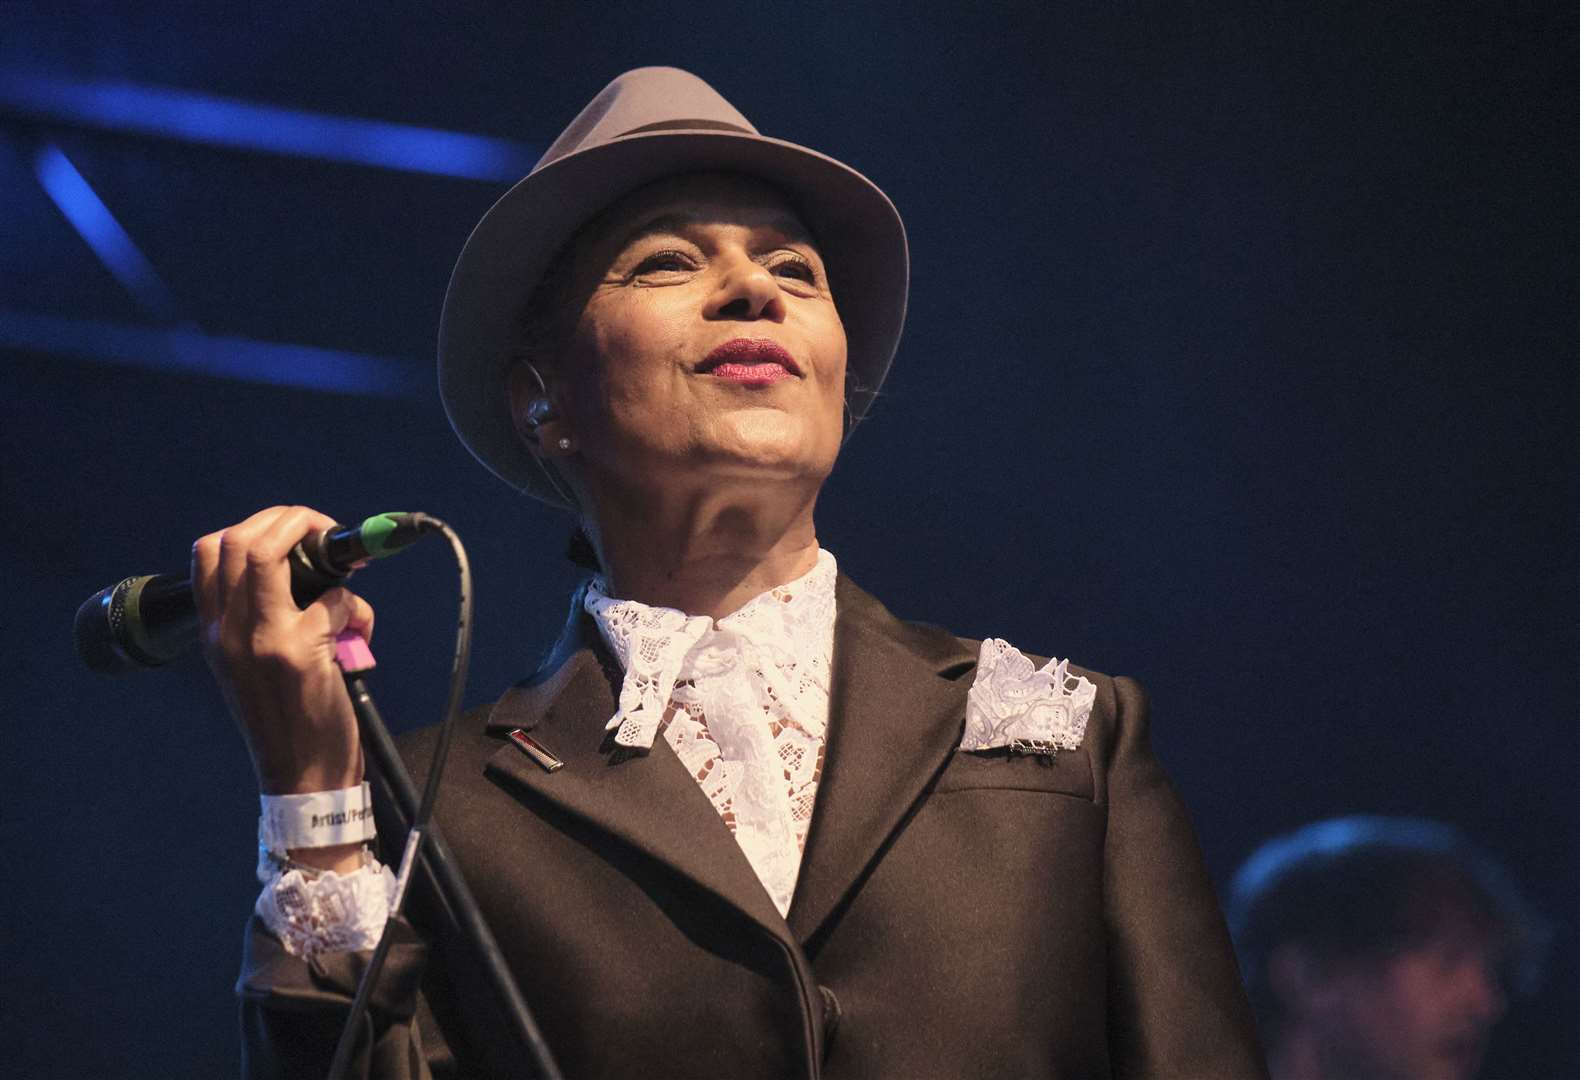 The Selecter will be performing on the final night